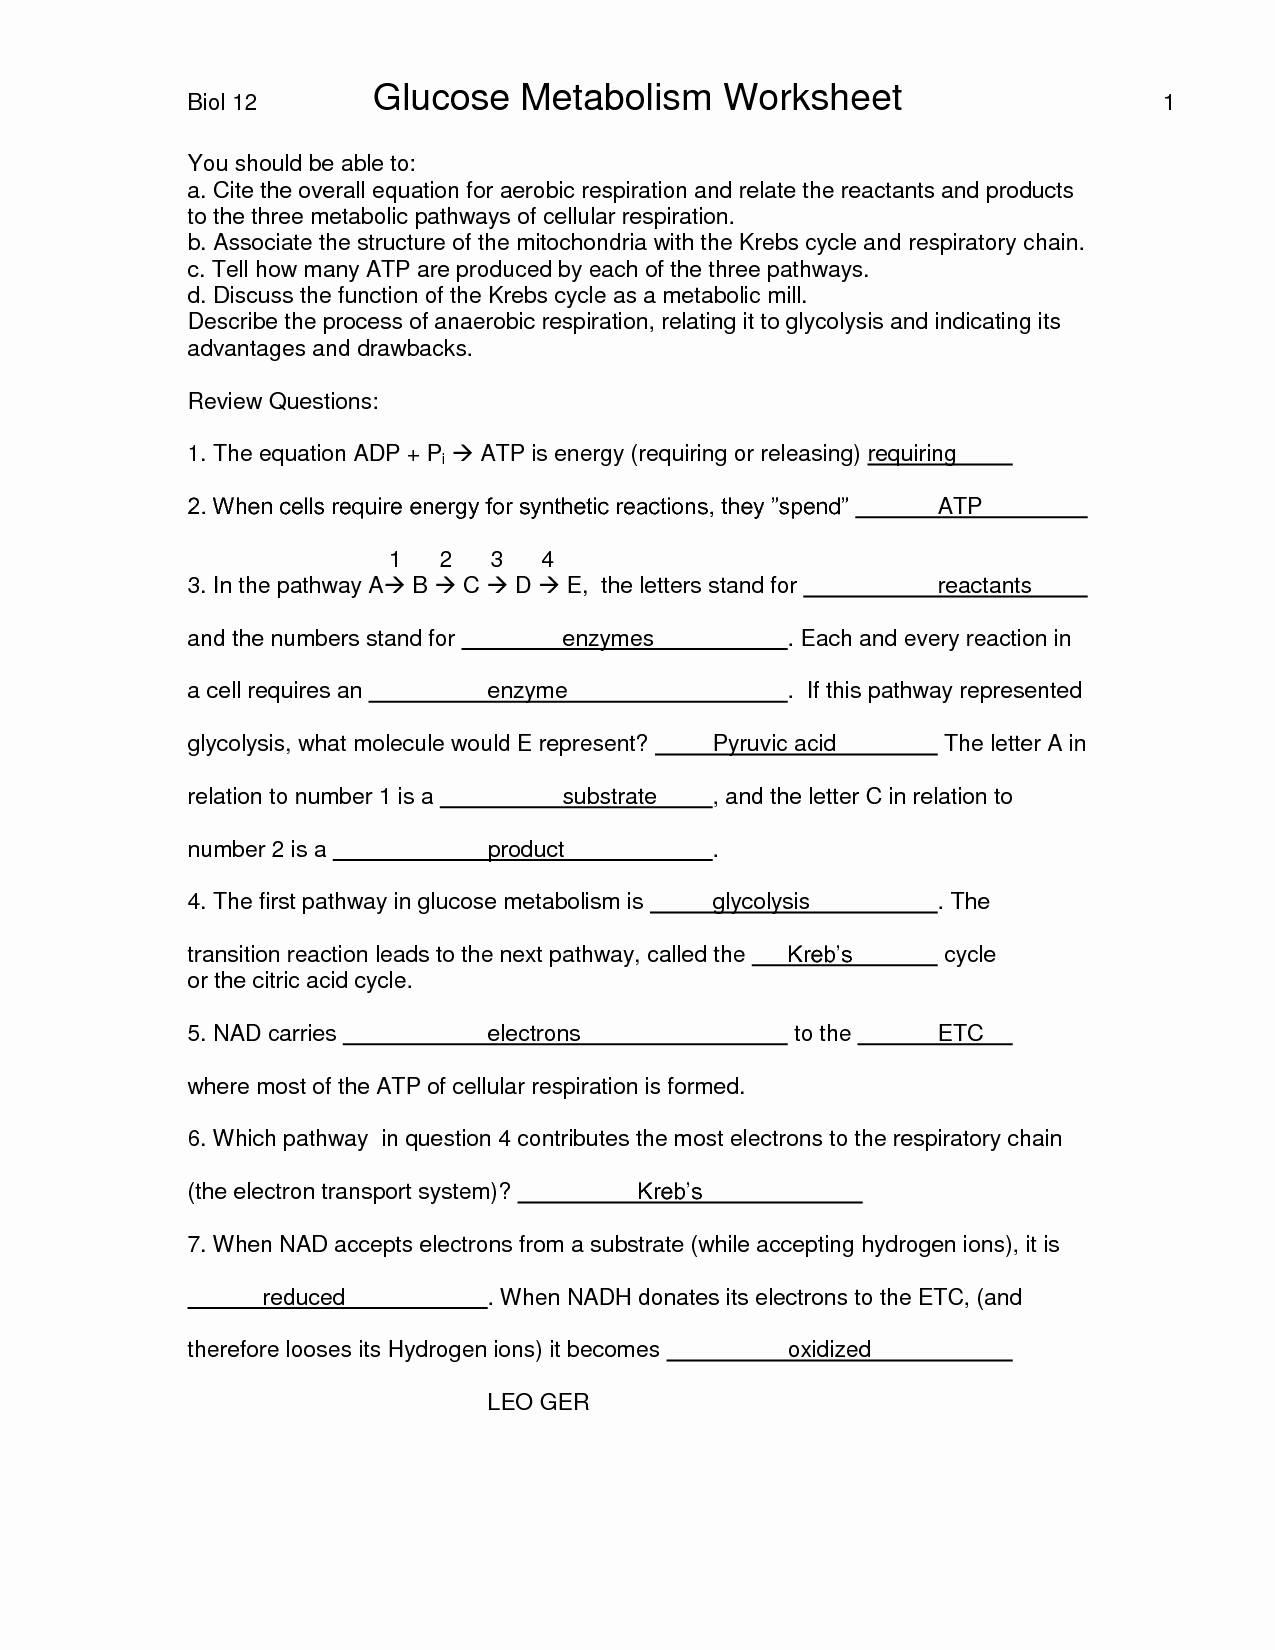 Cellular Respiration Worksheet Answer Key Lovely 16 Best Of the 12 Cell Review Worksheet Answers